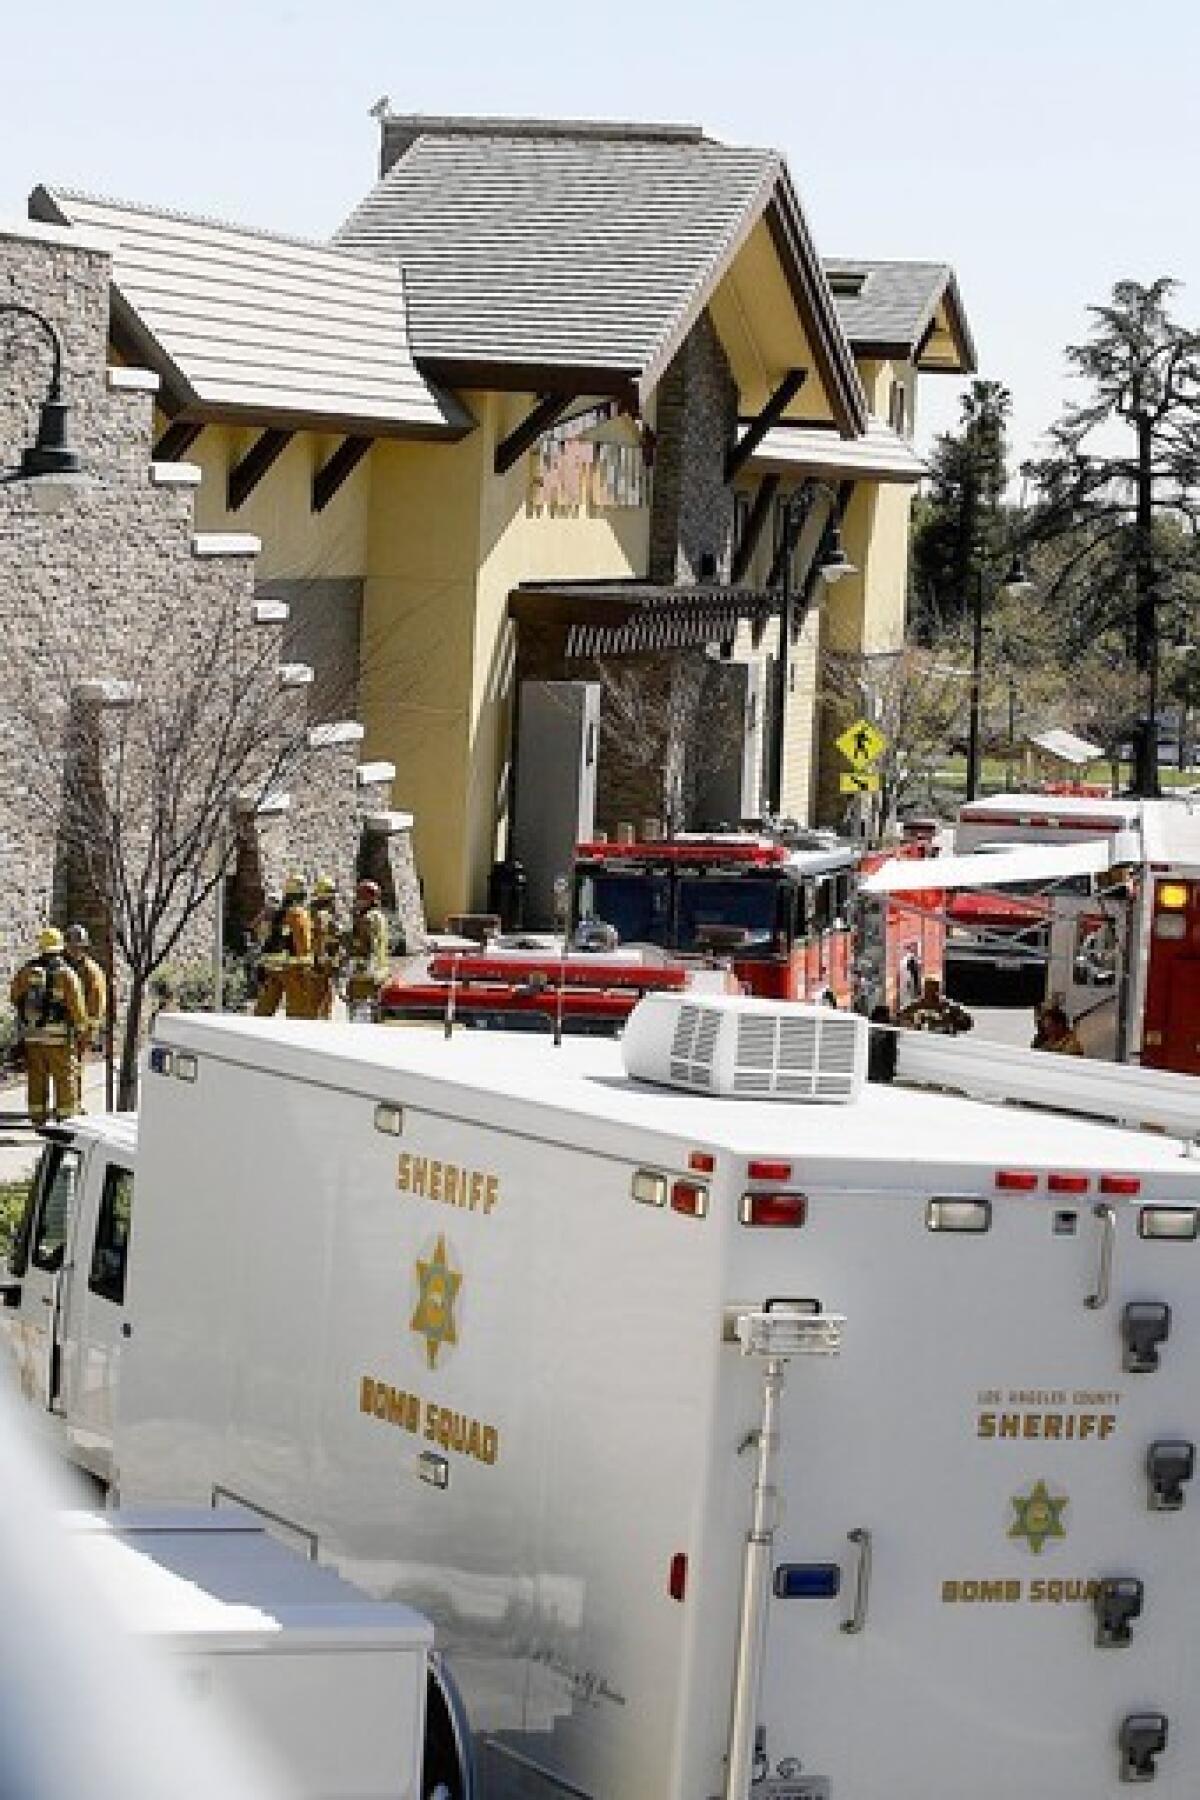 Los Angeles County Fire responded to an explosion, severely injuring two, at Sport Chalet in La Canada Flintridge on Friday, February 28, 2013. Hazmat and the Bomb Squad also responded.